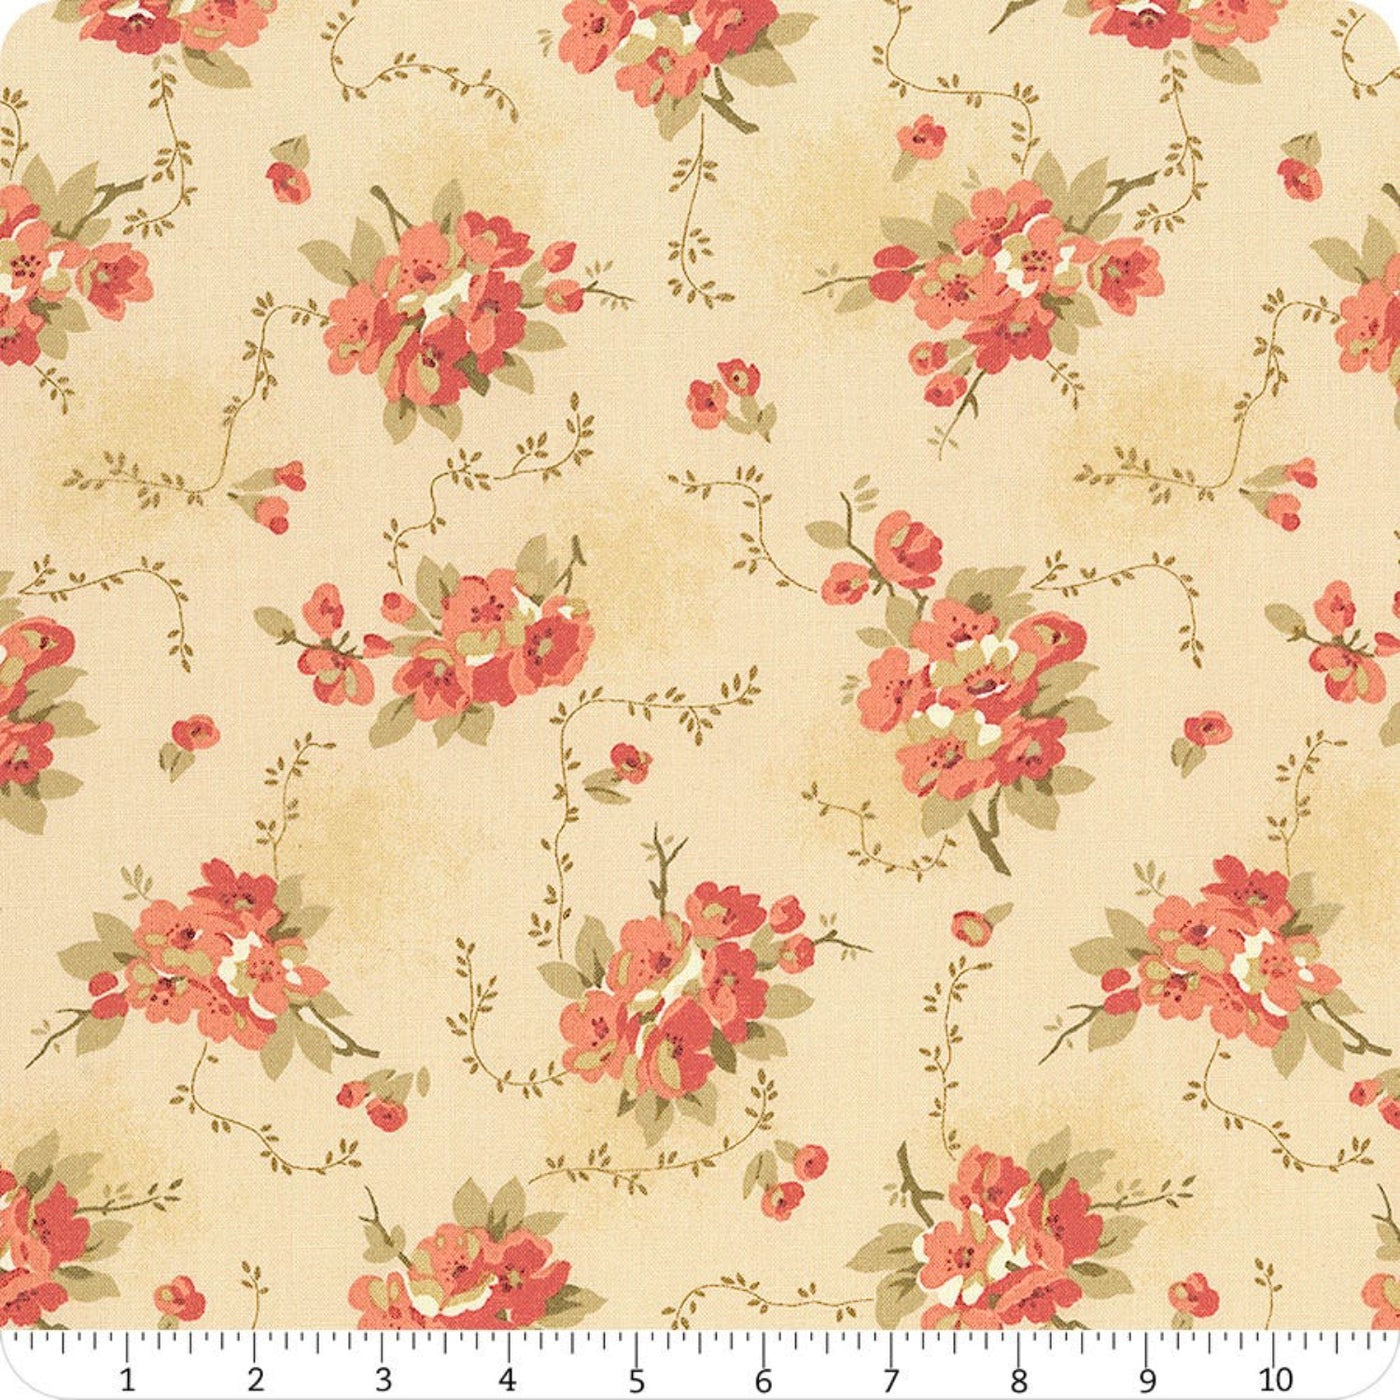 Primrose by Laundry Basket Quilts in Vintage Dahlia A-530-E